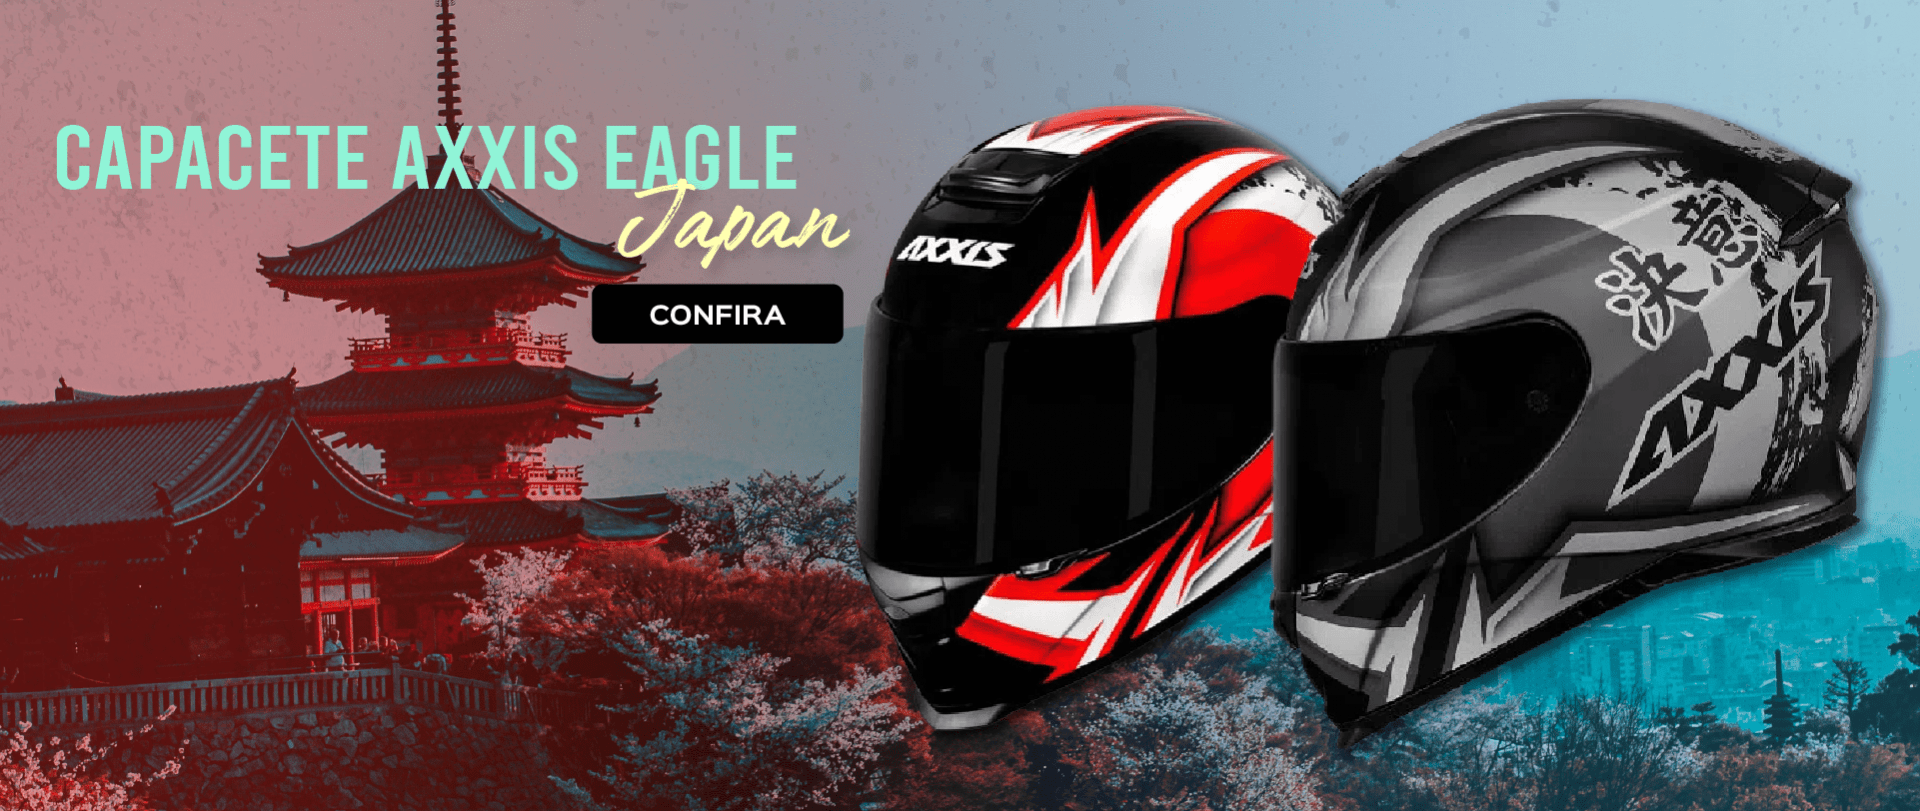 Capacete Axxis Eagle JAPAN